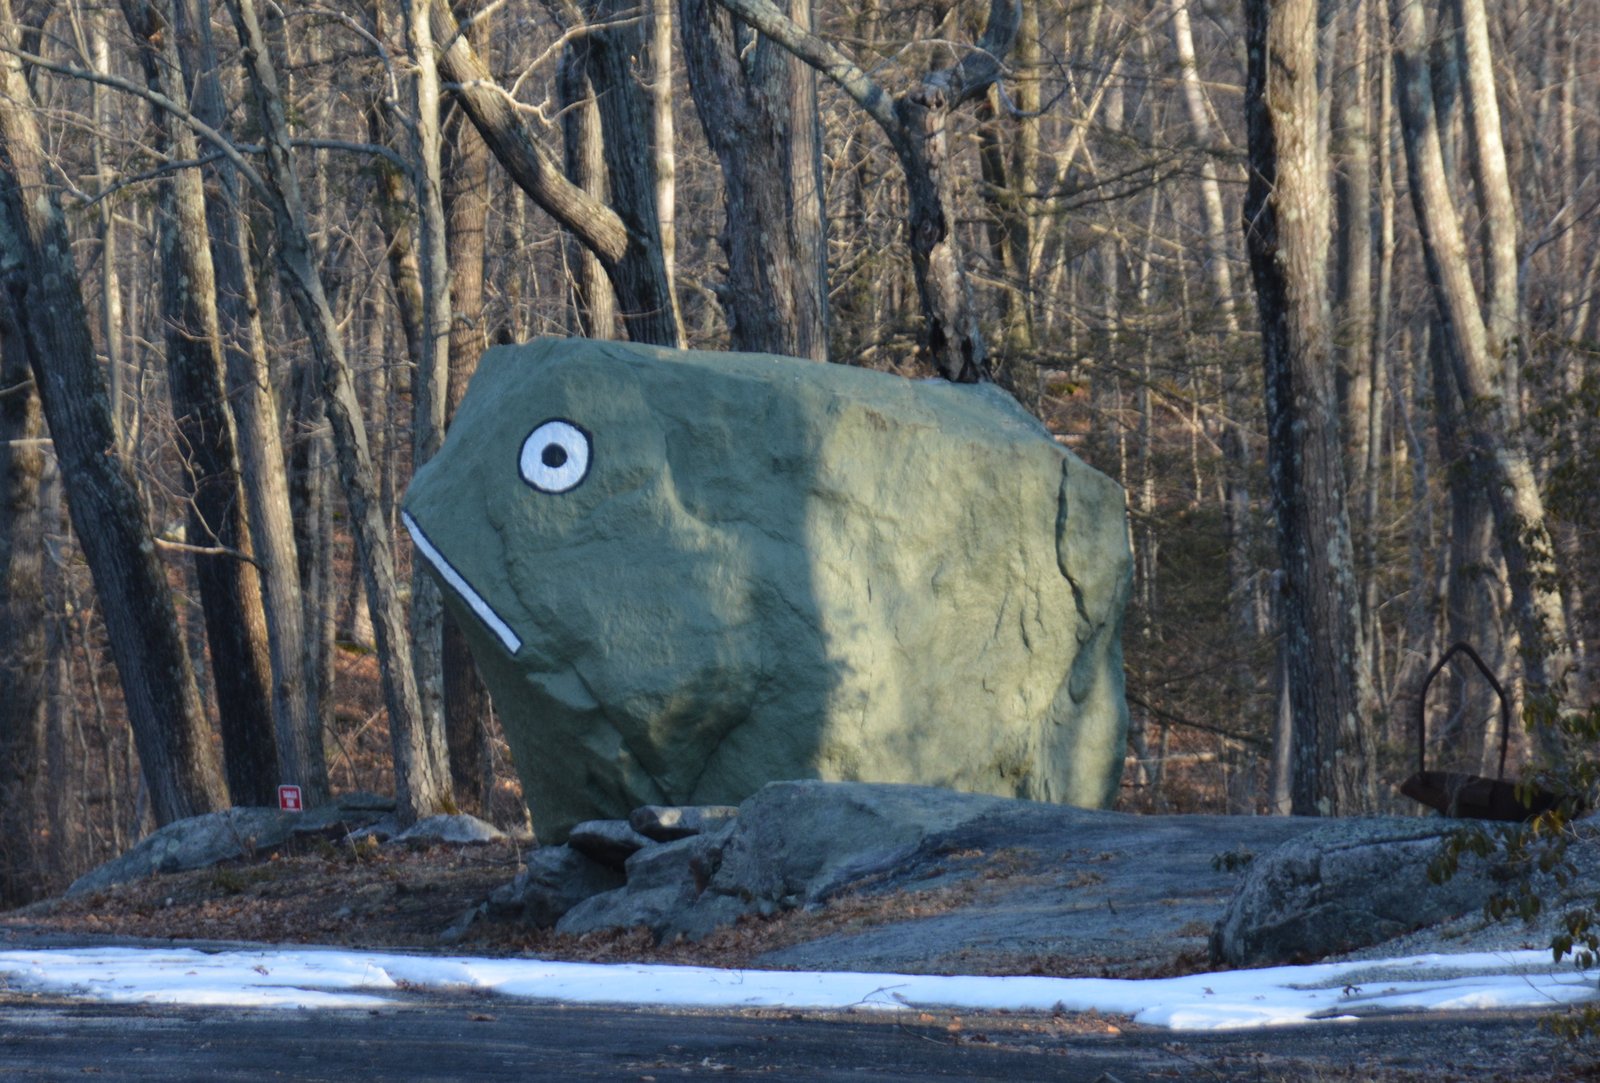 "Frog Rock" is a naturally shaped rock painted to enhance the frog-like shape